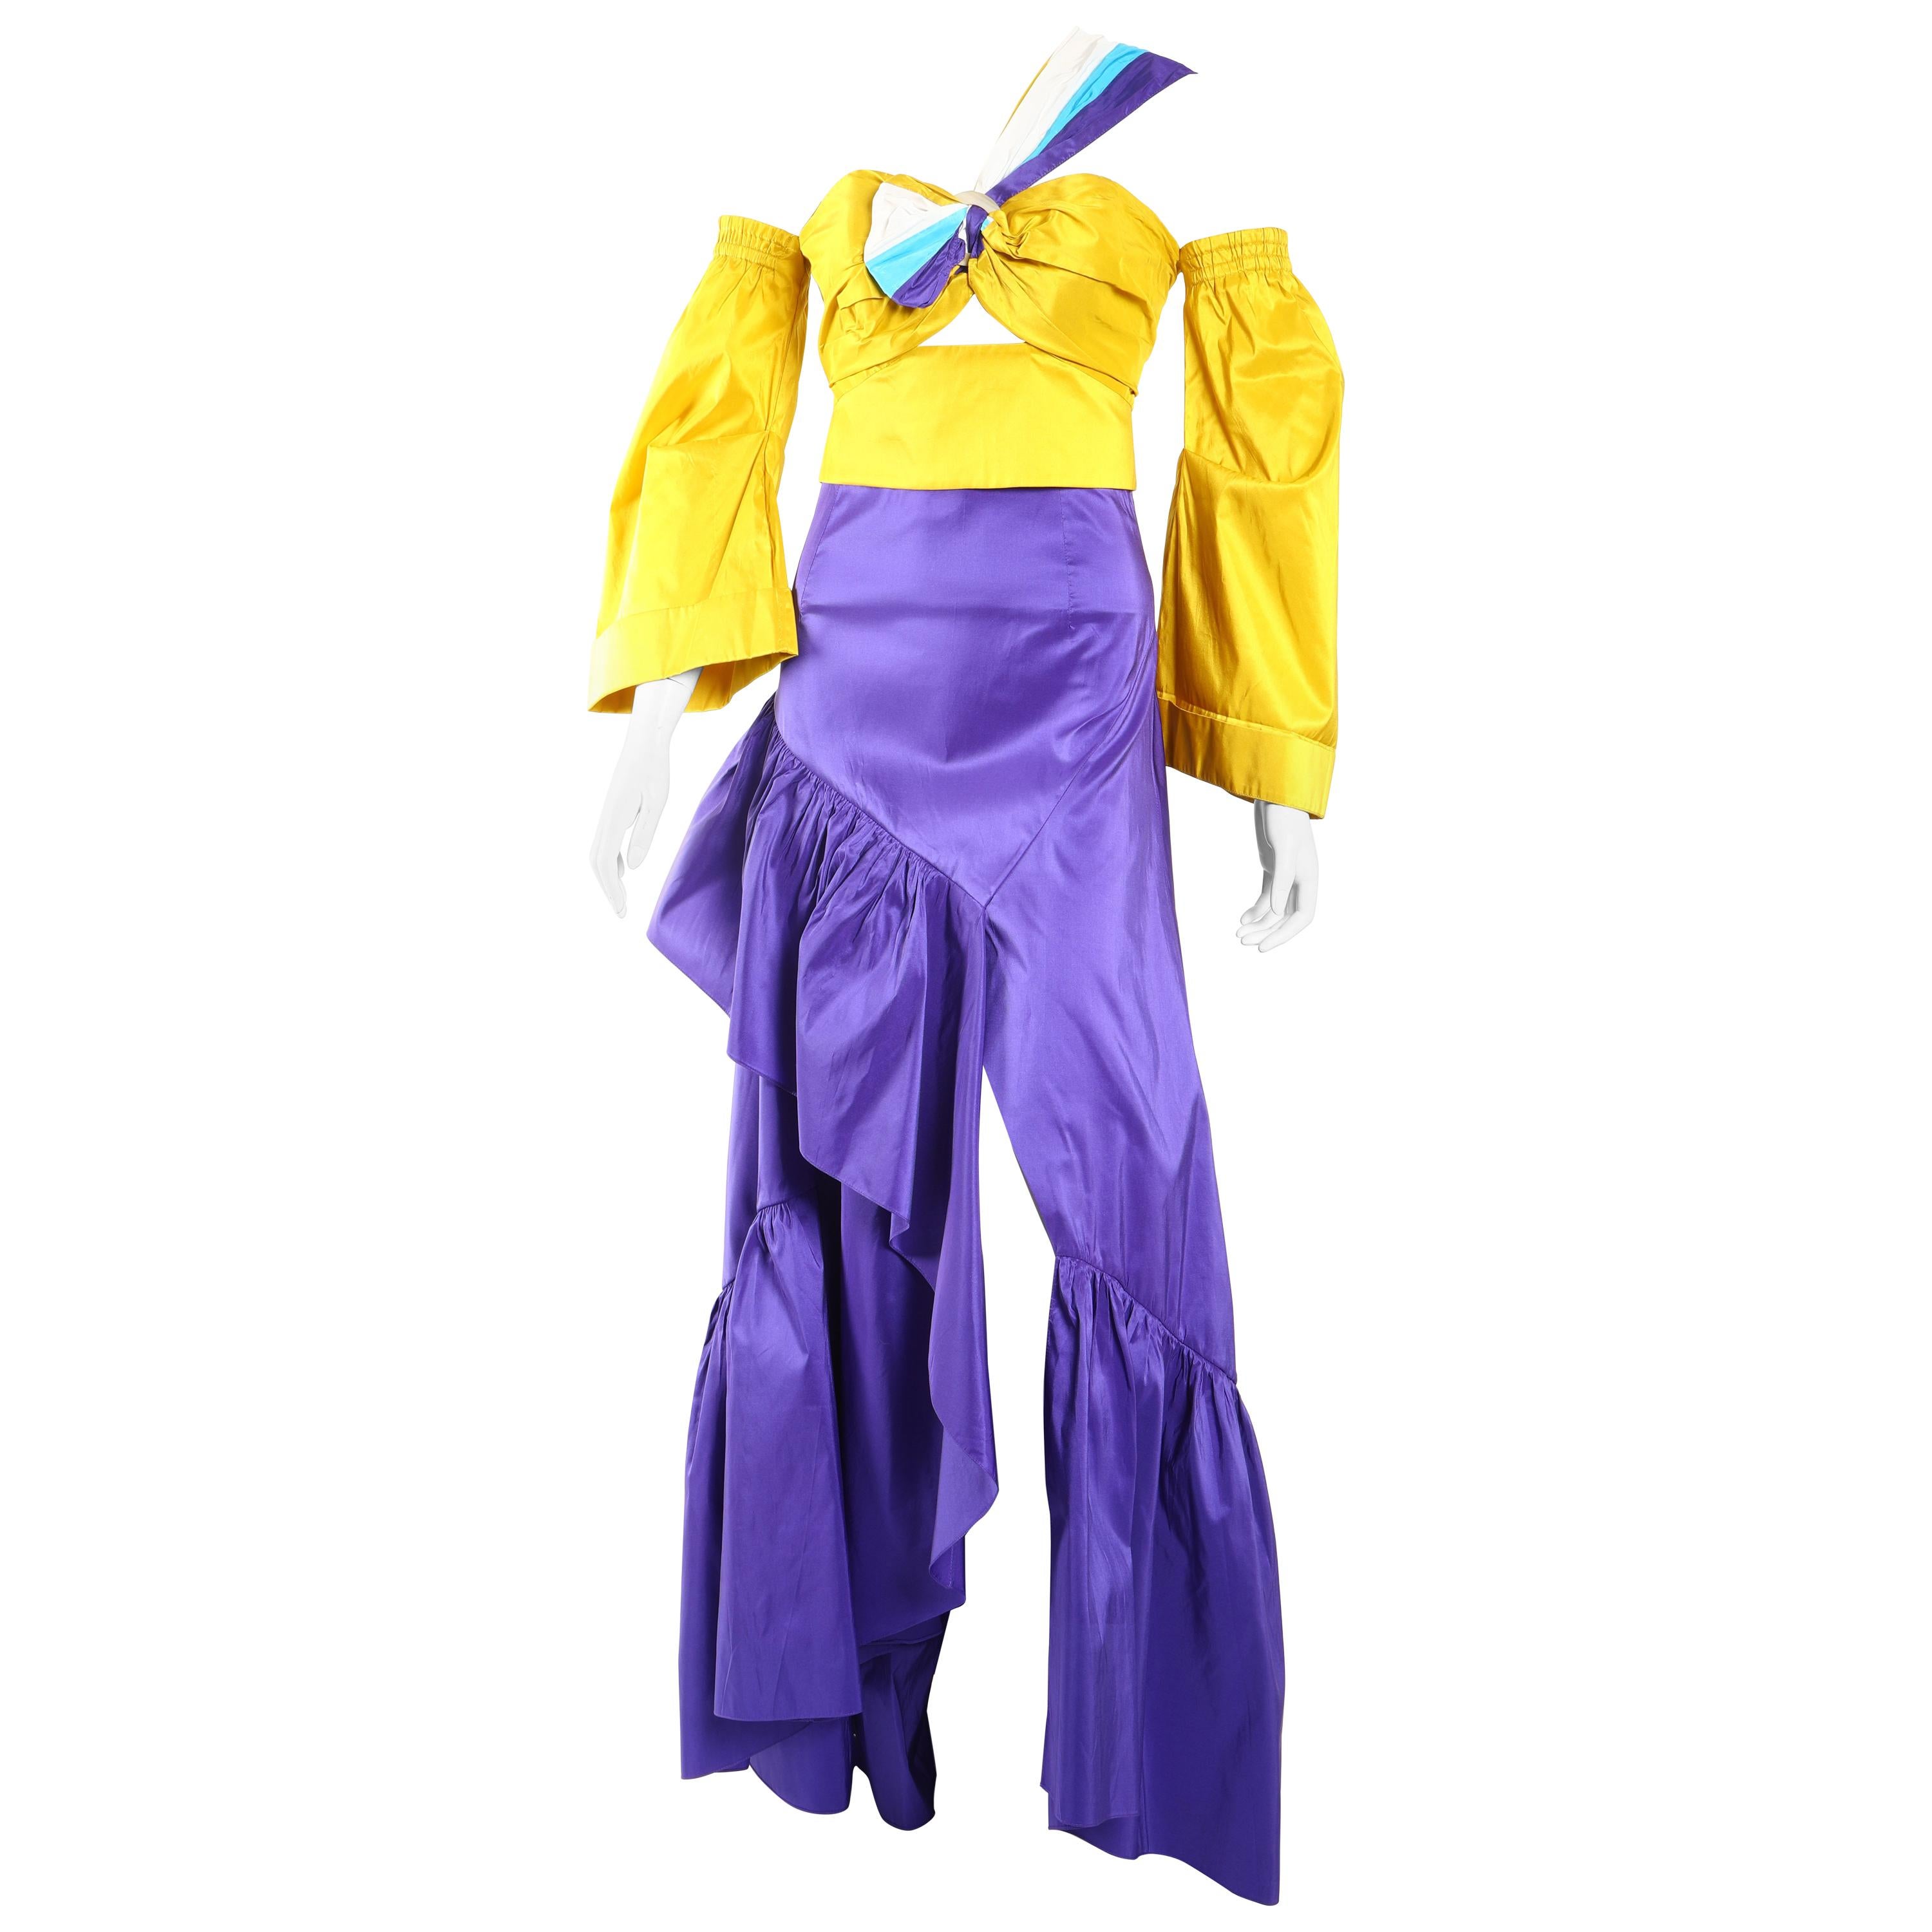 Peter Pilotto Yellow Taffeta Crop Top with Purple Ballroom Skirt 

This Peter Pilotto paneled, yellow, taffeta Top with  purple long Skirt is a show-stopper! 
Sleeve are off the shoulder and skirt sits on the waist.

Never worn or no signs of wear.